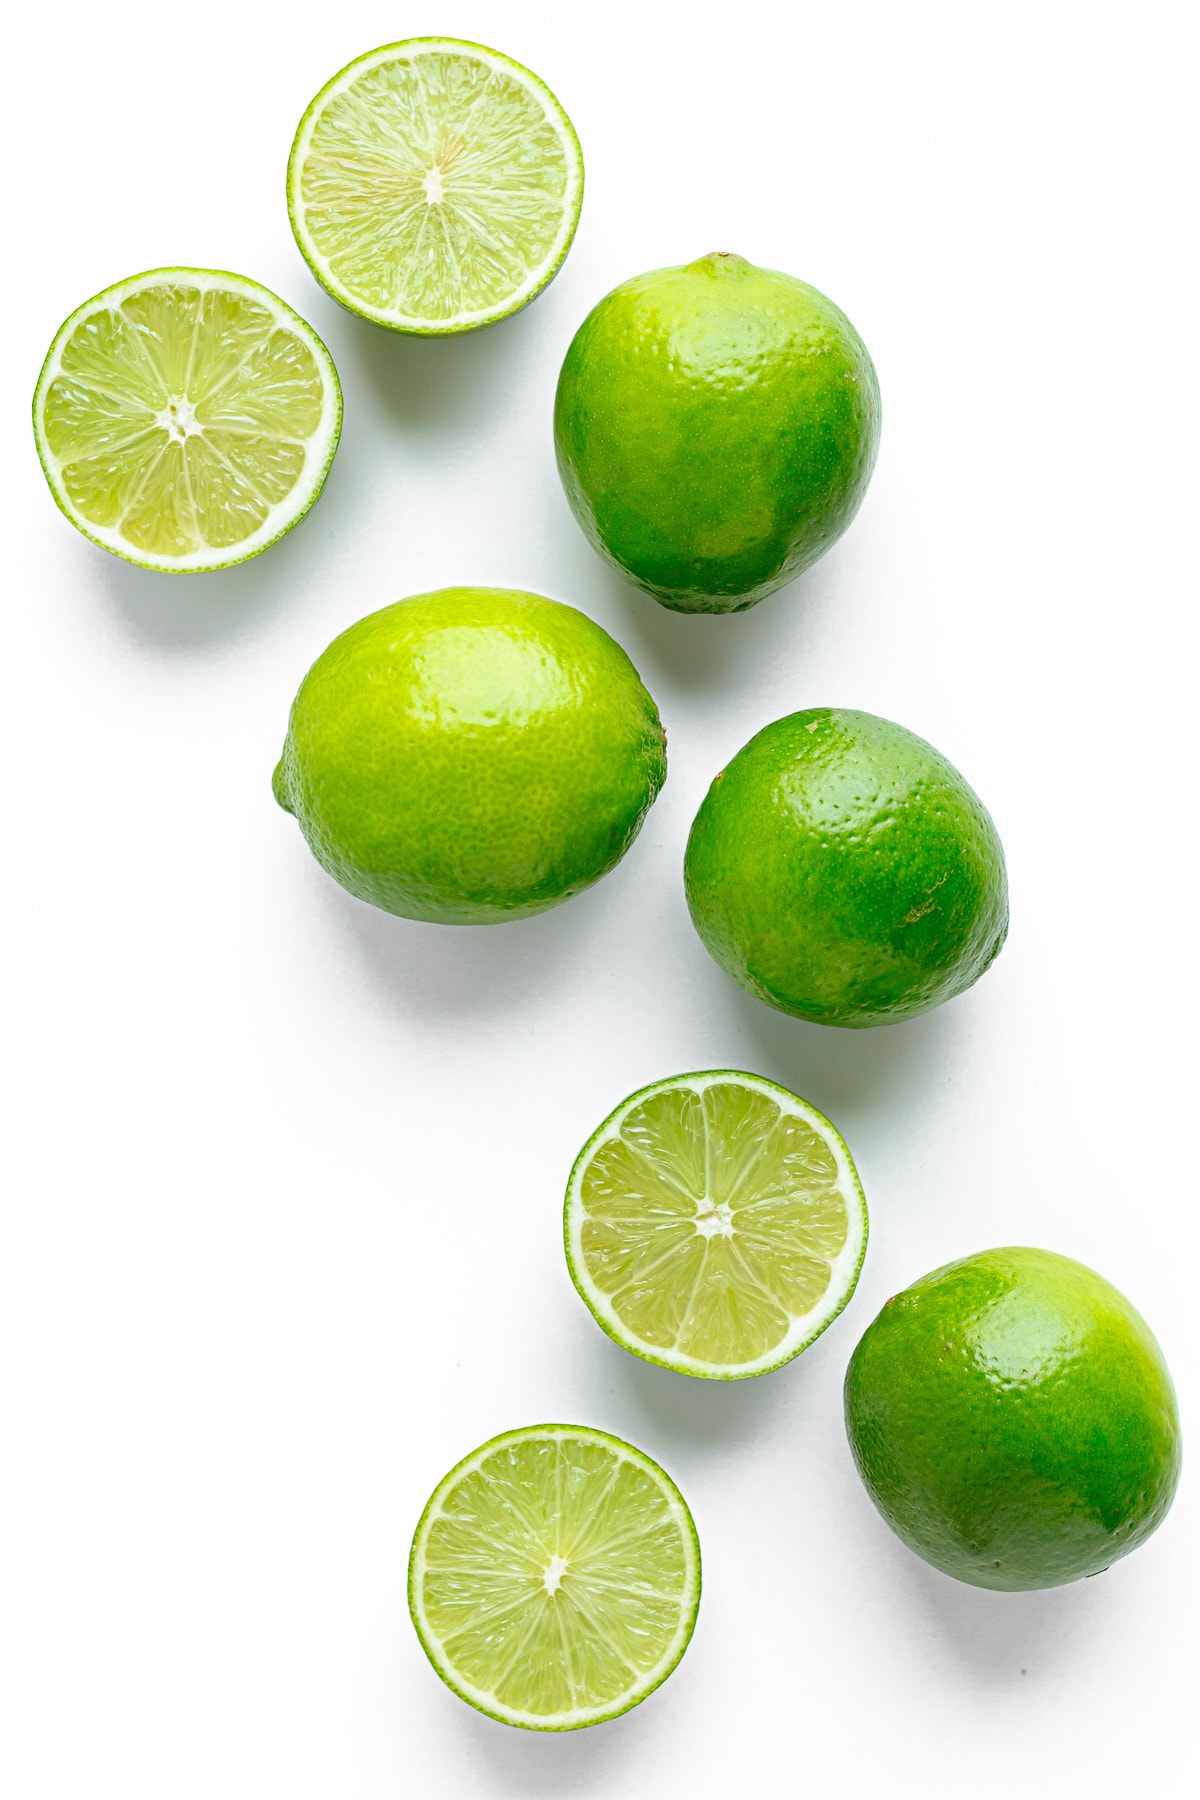 A bunch of whole and halved limes arranged across a white background.